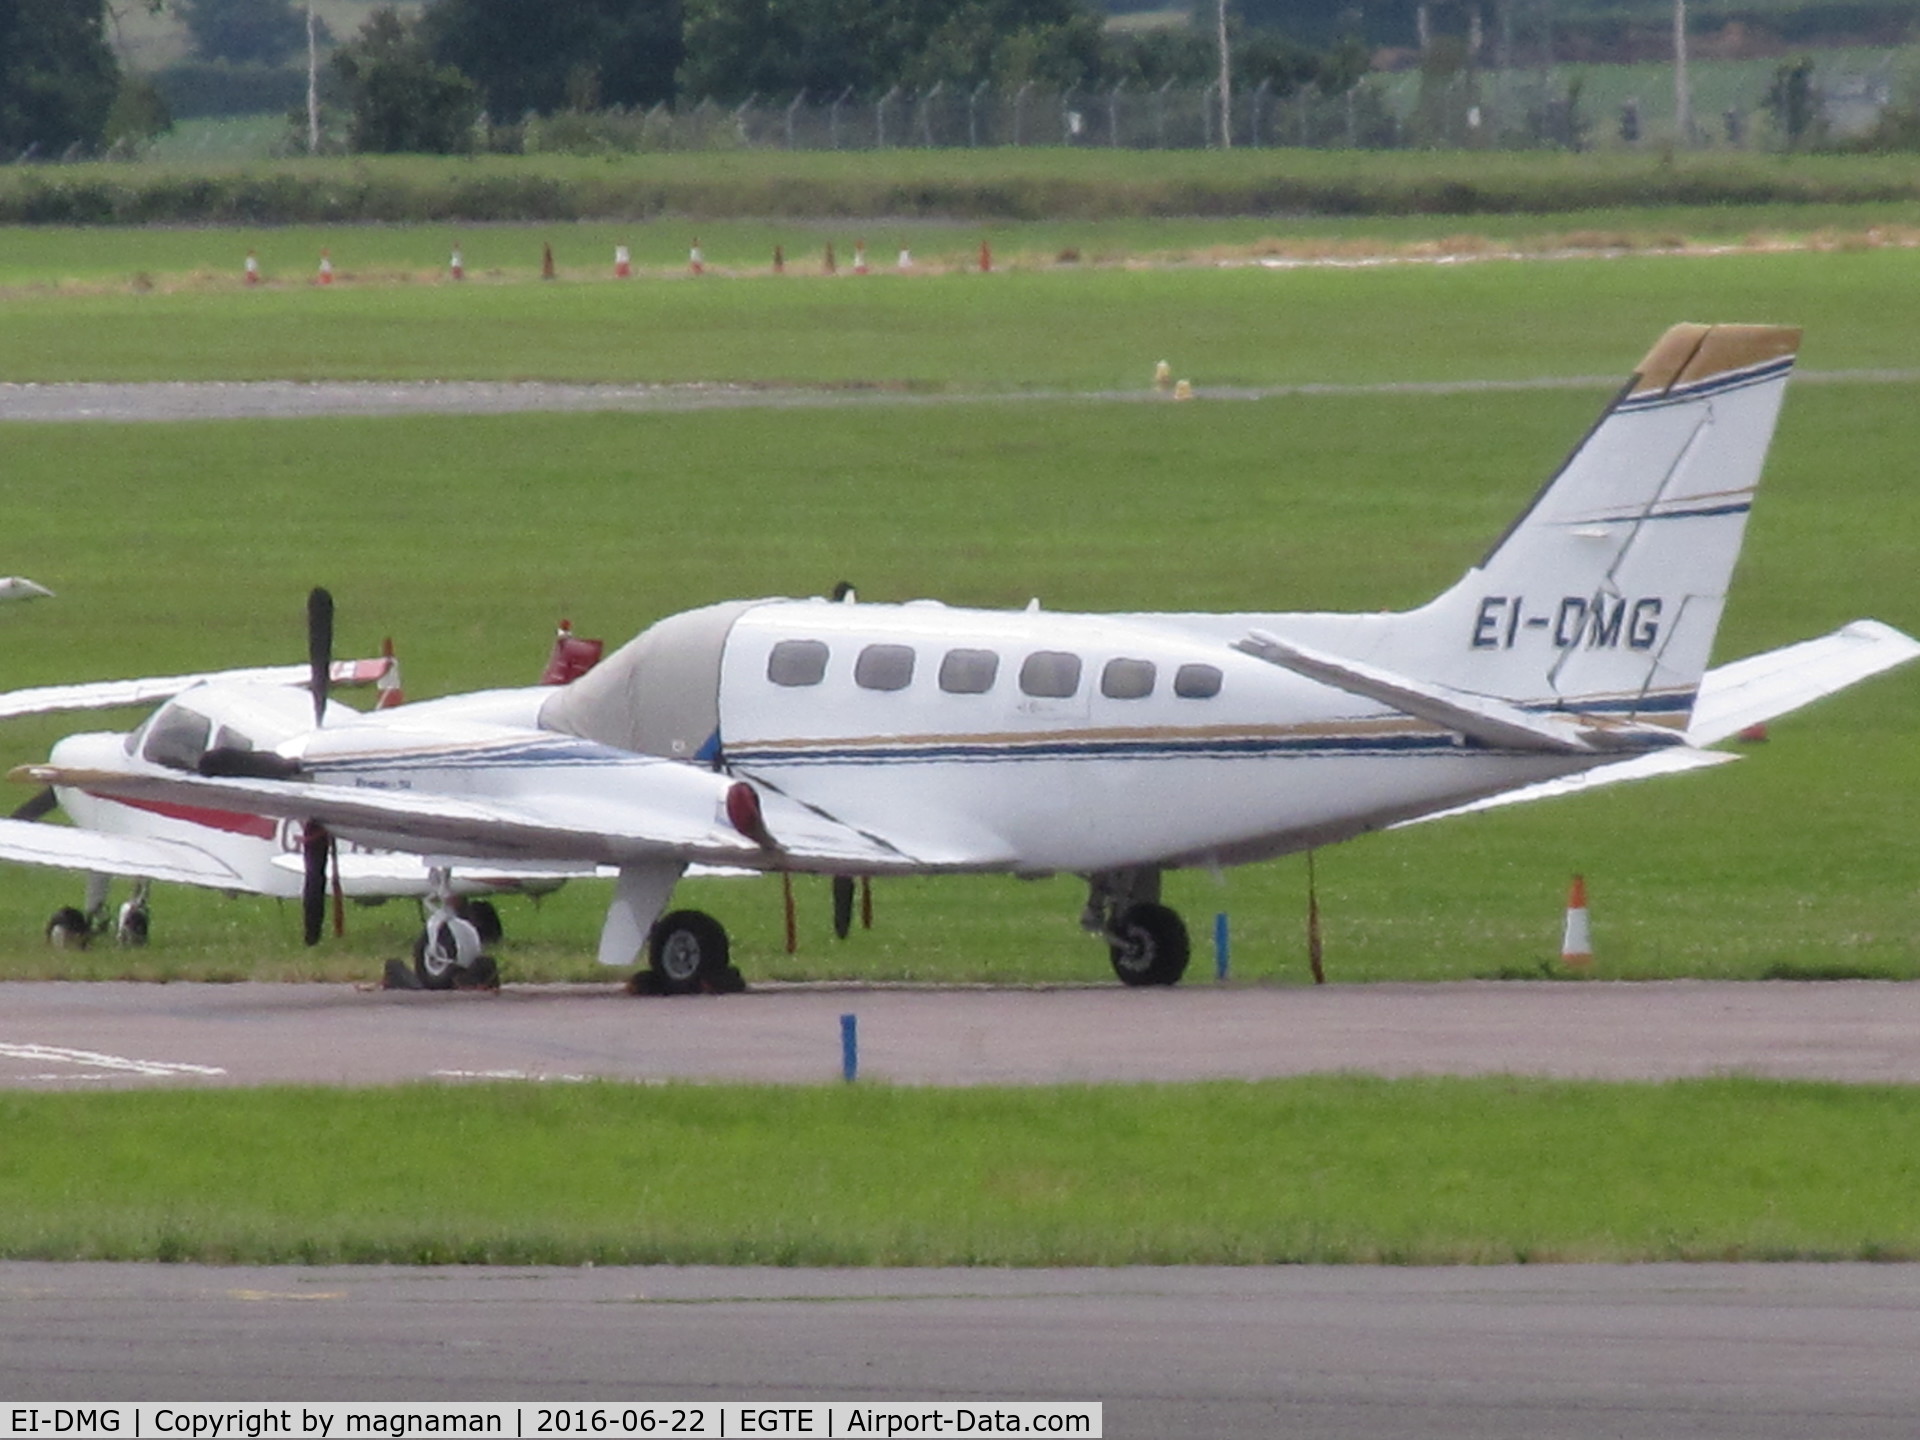 EI-DMG, 1980 Cessna 441 Conquest II C/N 441-0165, across apron at Exeter